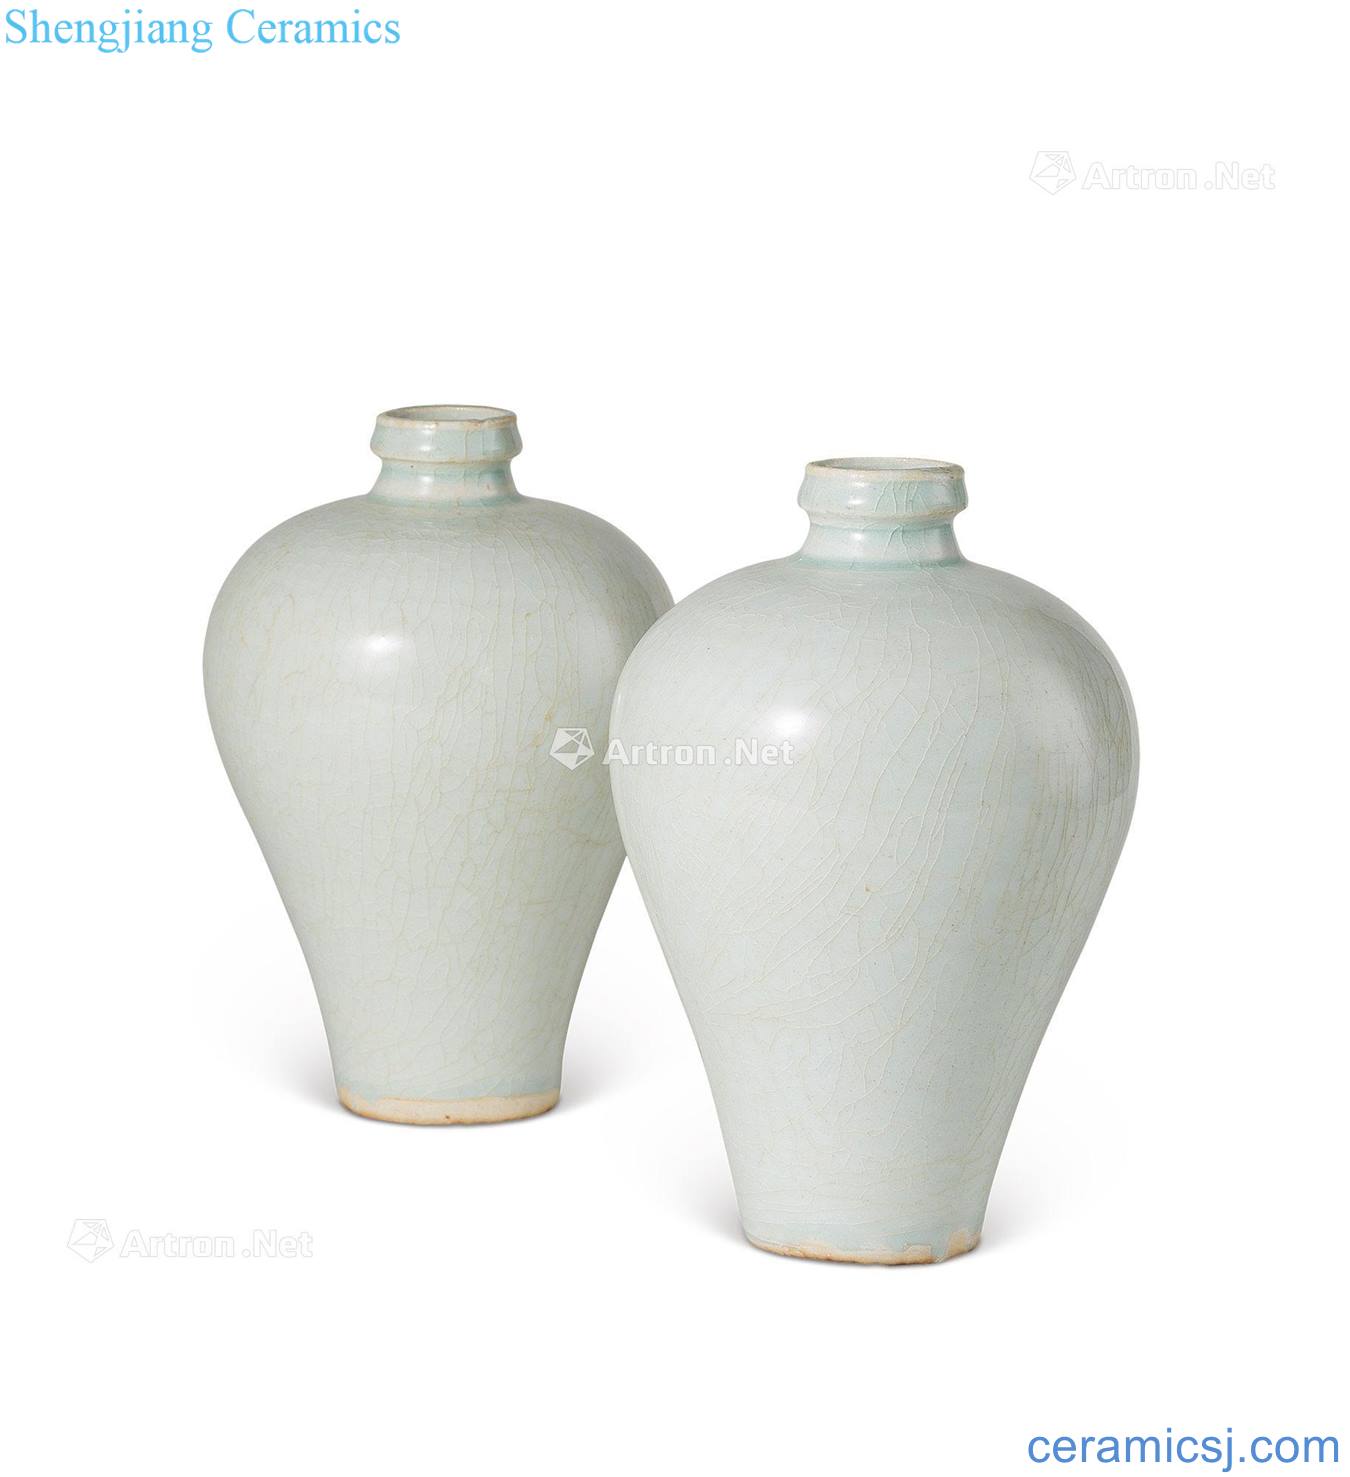 Ming shadow greengage bottle (a)